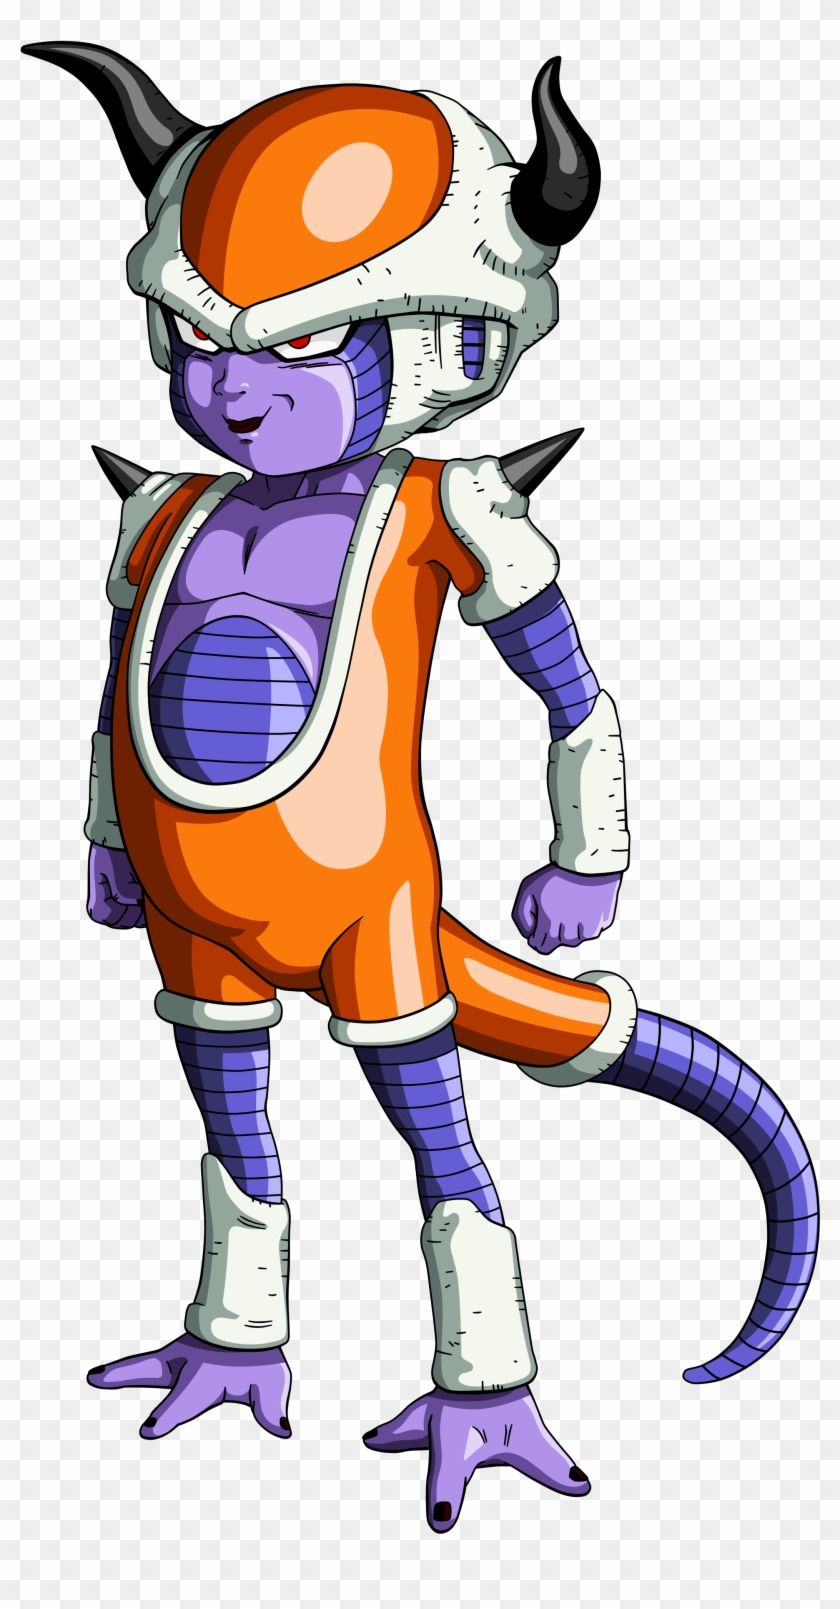 Antepasado De Freezer Dragon Ball Z Lord Chilled Free Transparent Png Clipart Images Download